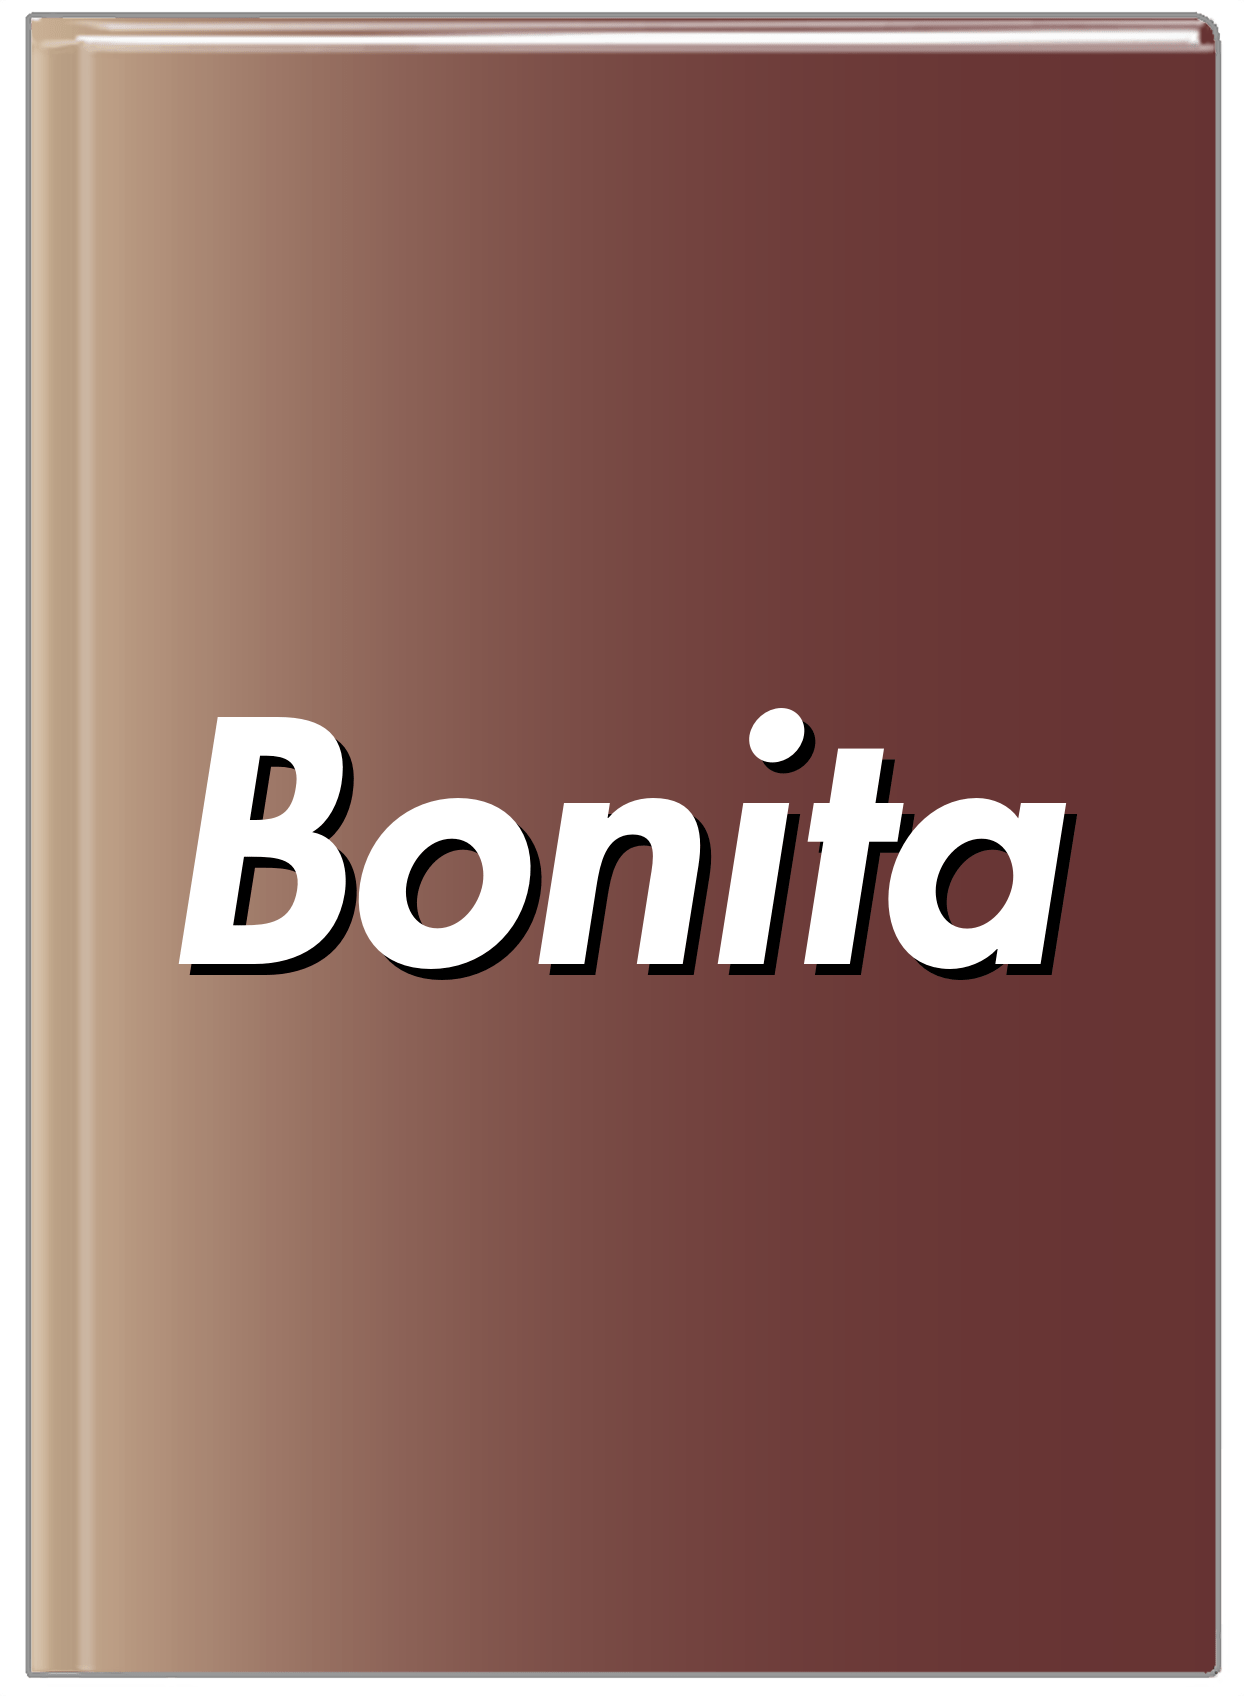 Personalized Ombre Journal - Brown and Tan - Front View